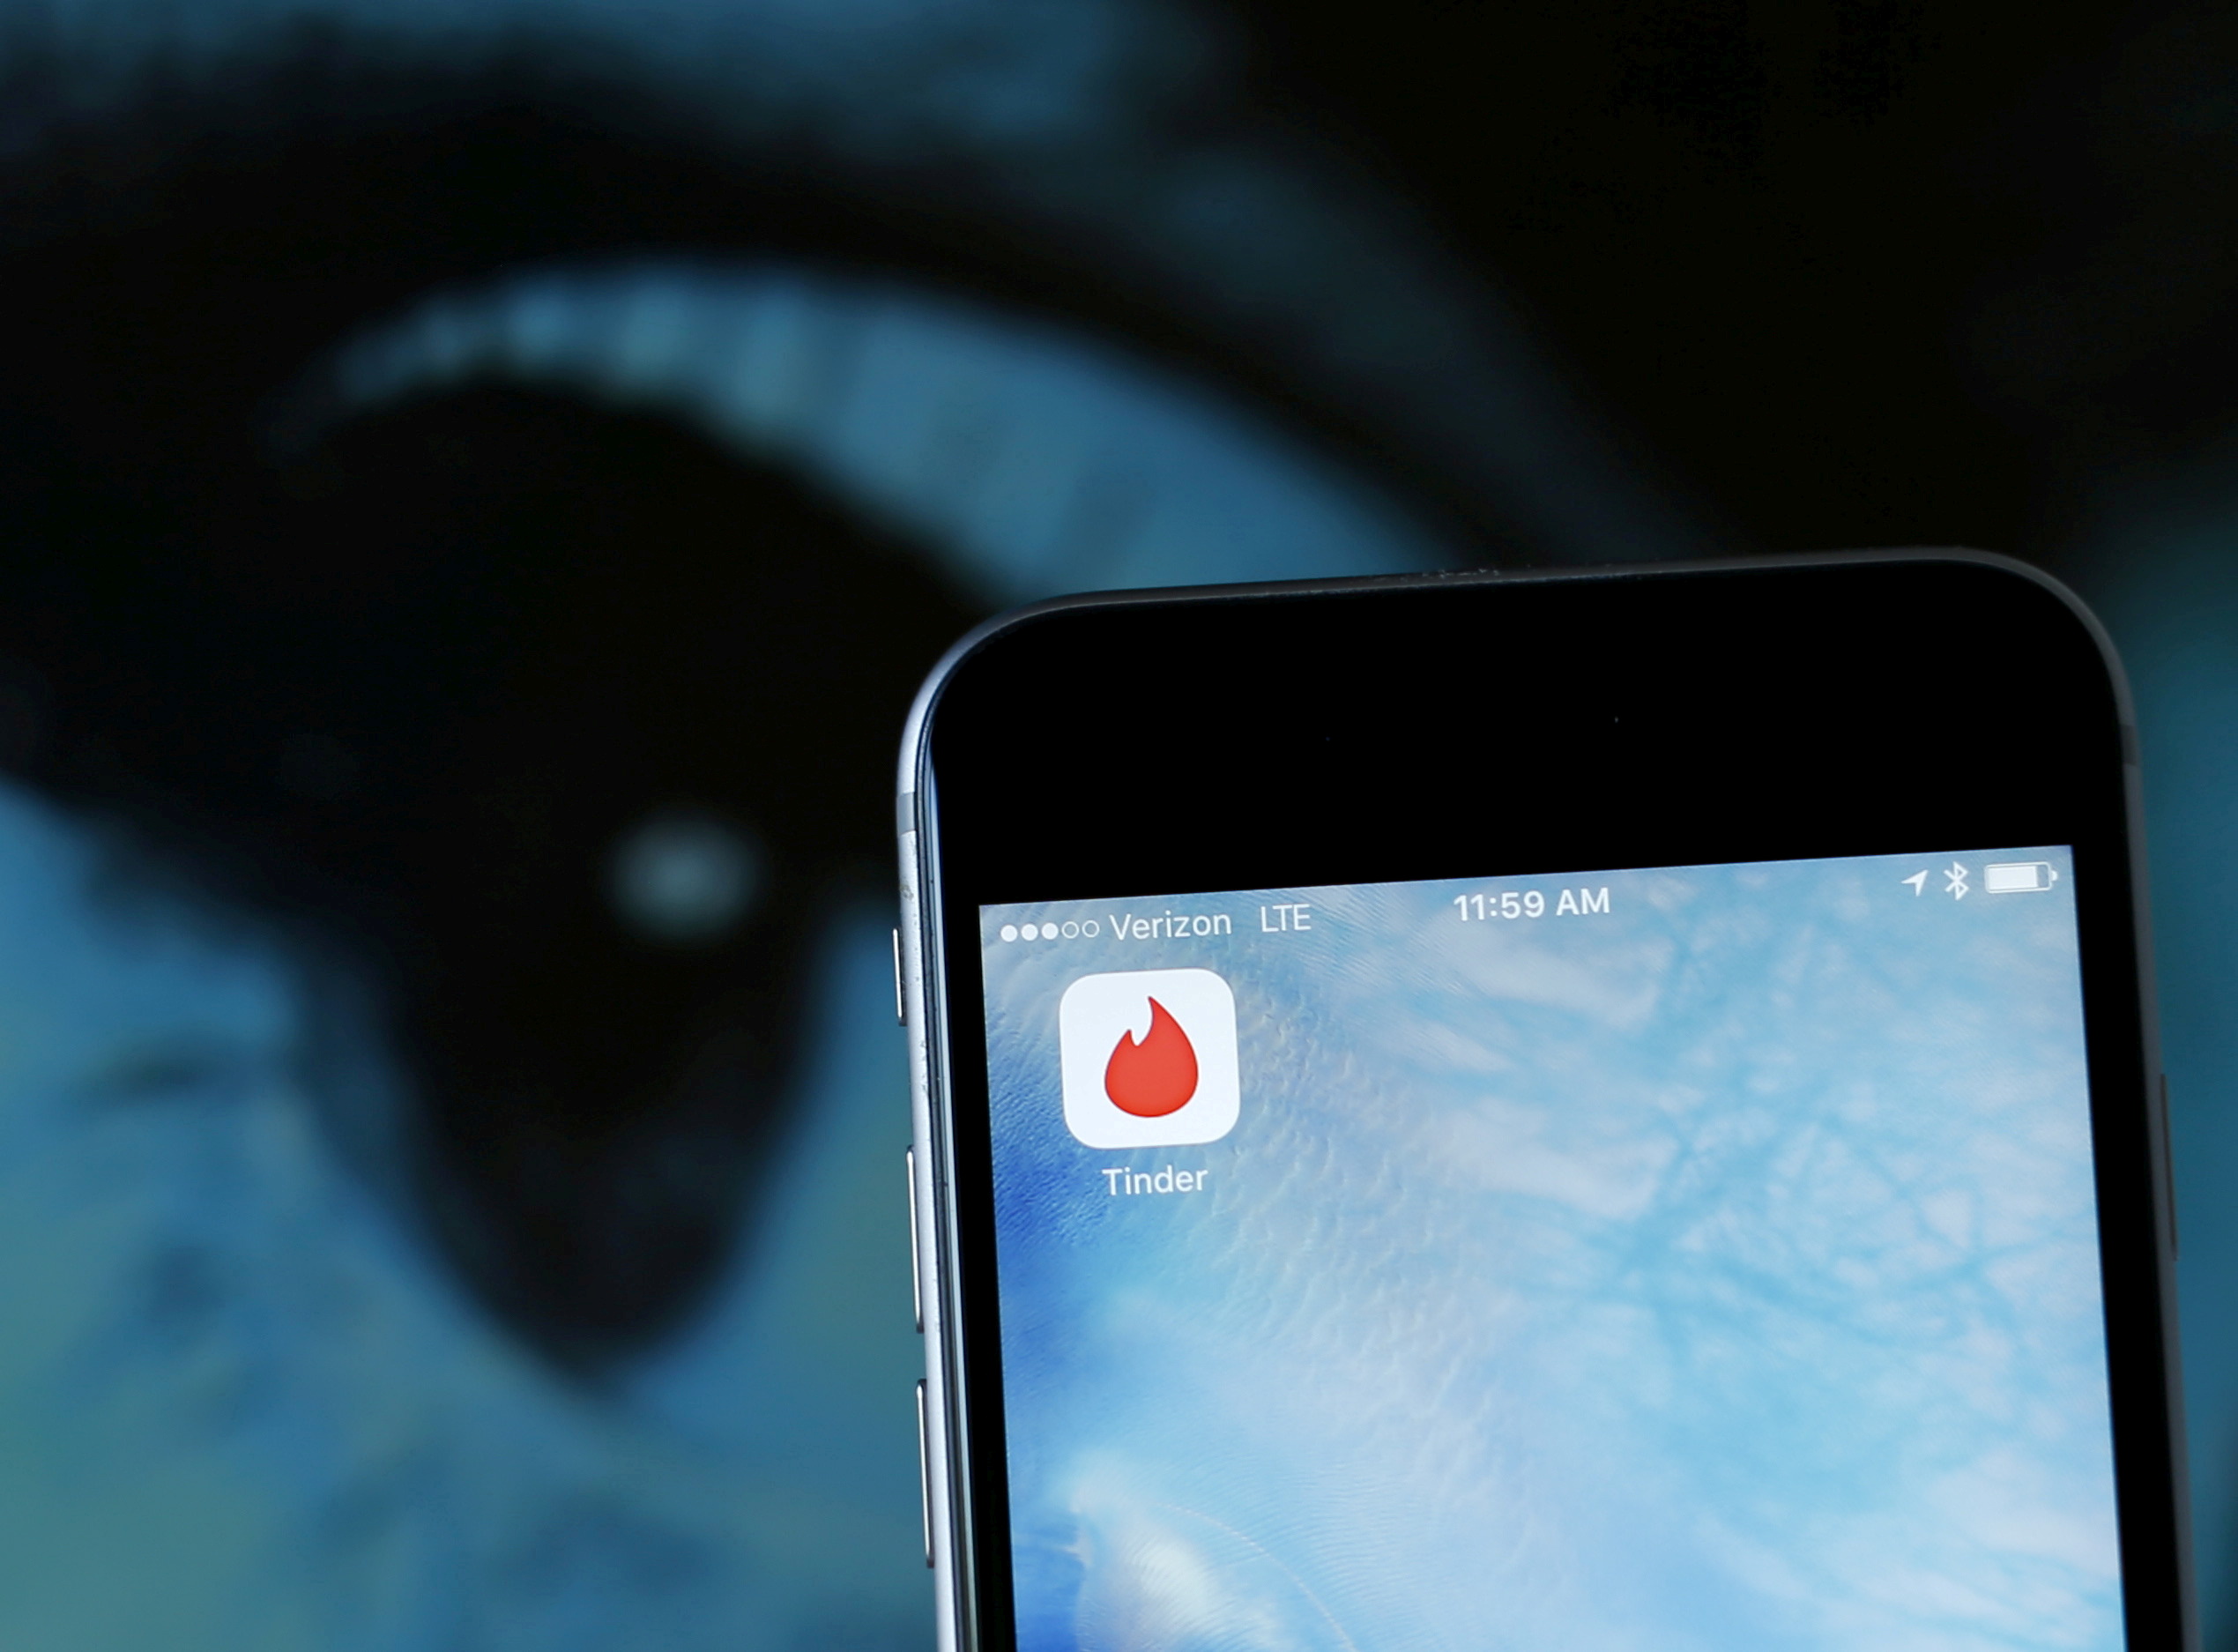 Photo illustration of dating app Tinder shown on an Apple iPhone